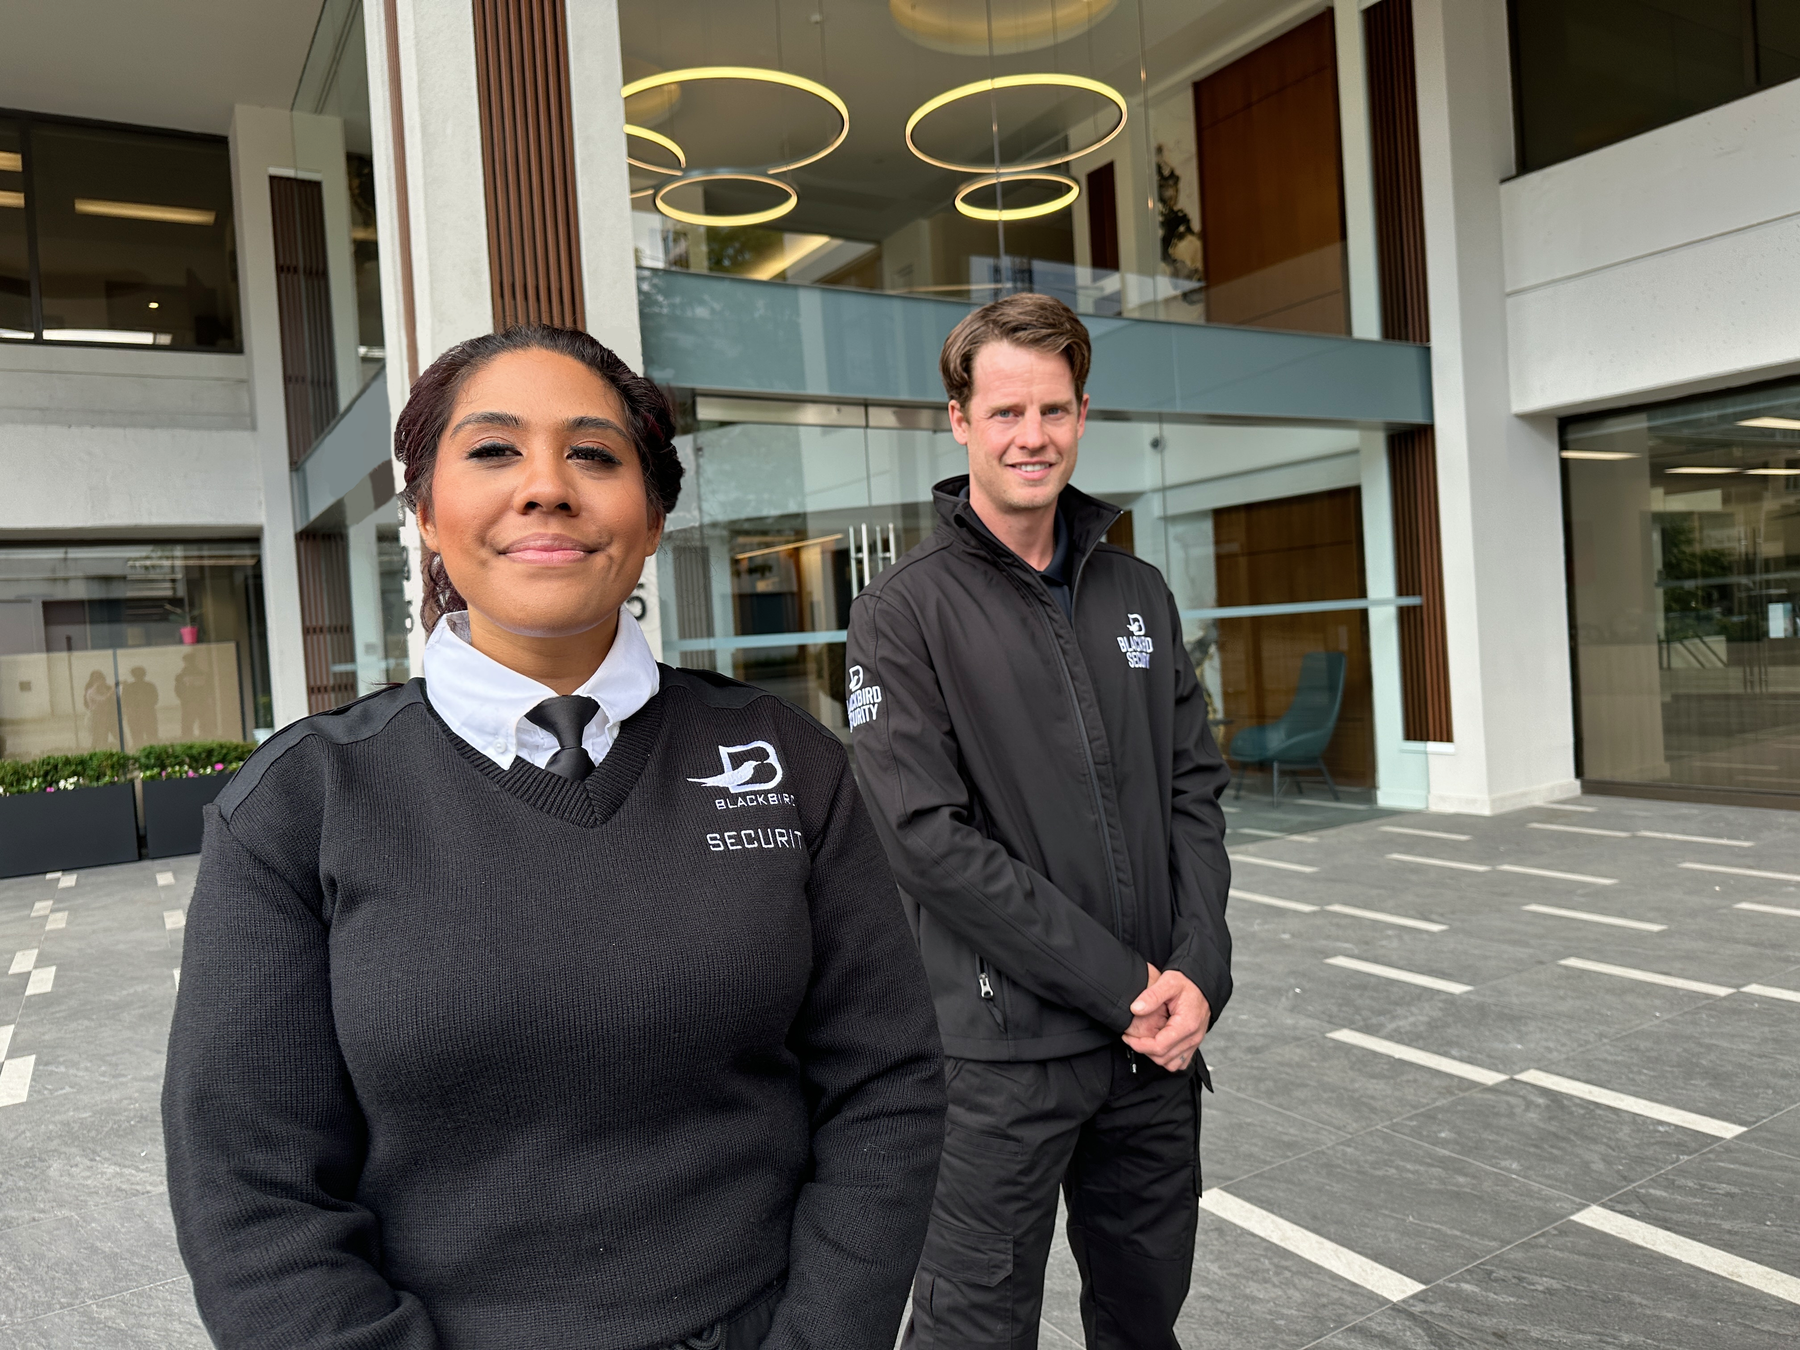 A pair of smiling Blackbird security guards stand outside of a commercial building